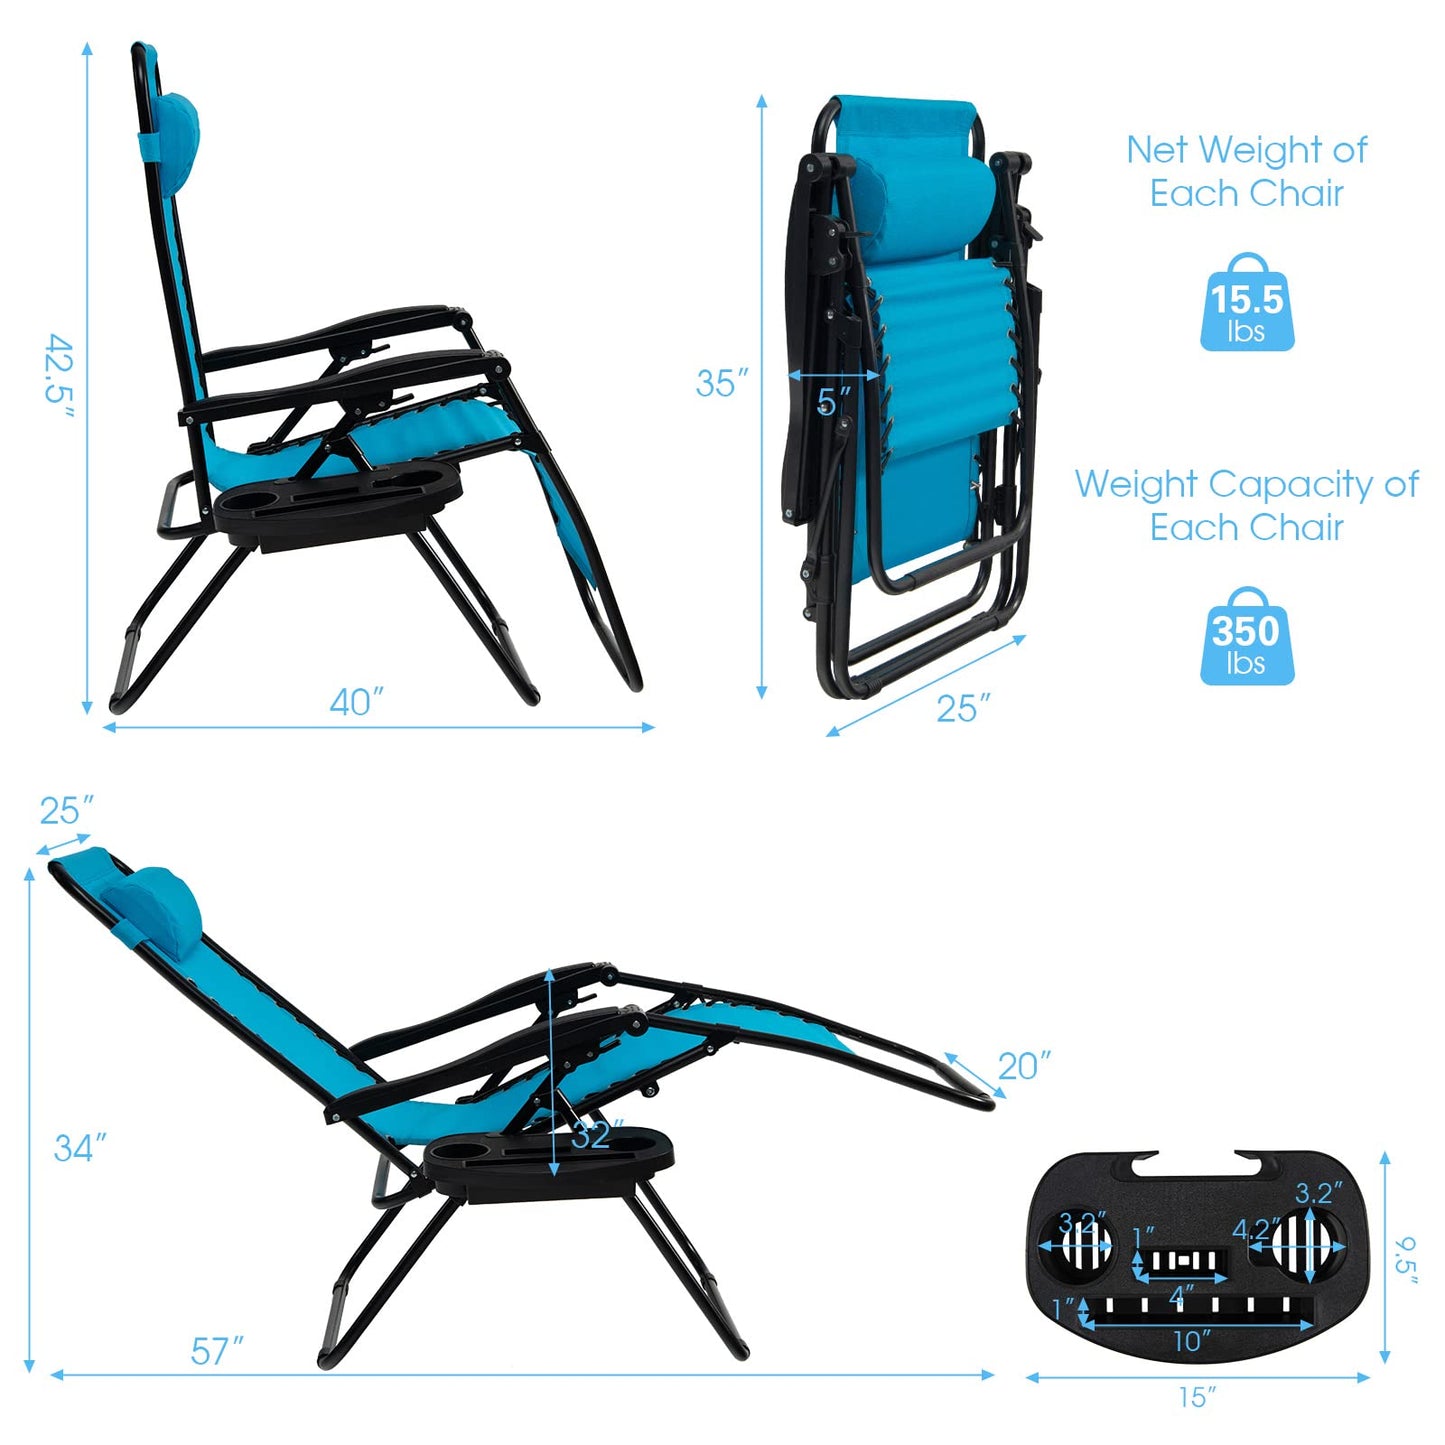 Goplus Zero Gravity Chair, Adjustable Folding Reclining Lounge Chair with Pillow and Cup Holder, Patio Lawn Recliner for Outdoor Pool Camp Yard (1, Light Blue) set of 1